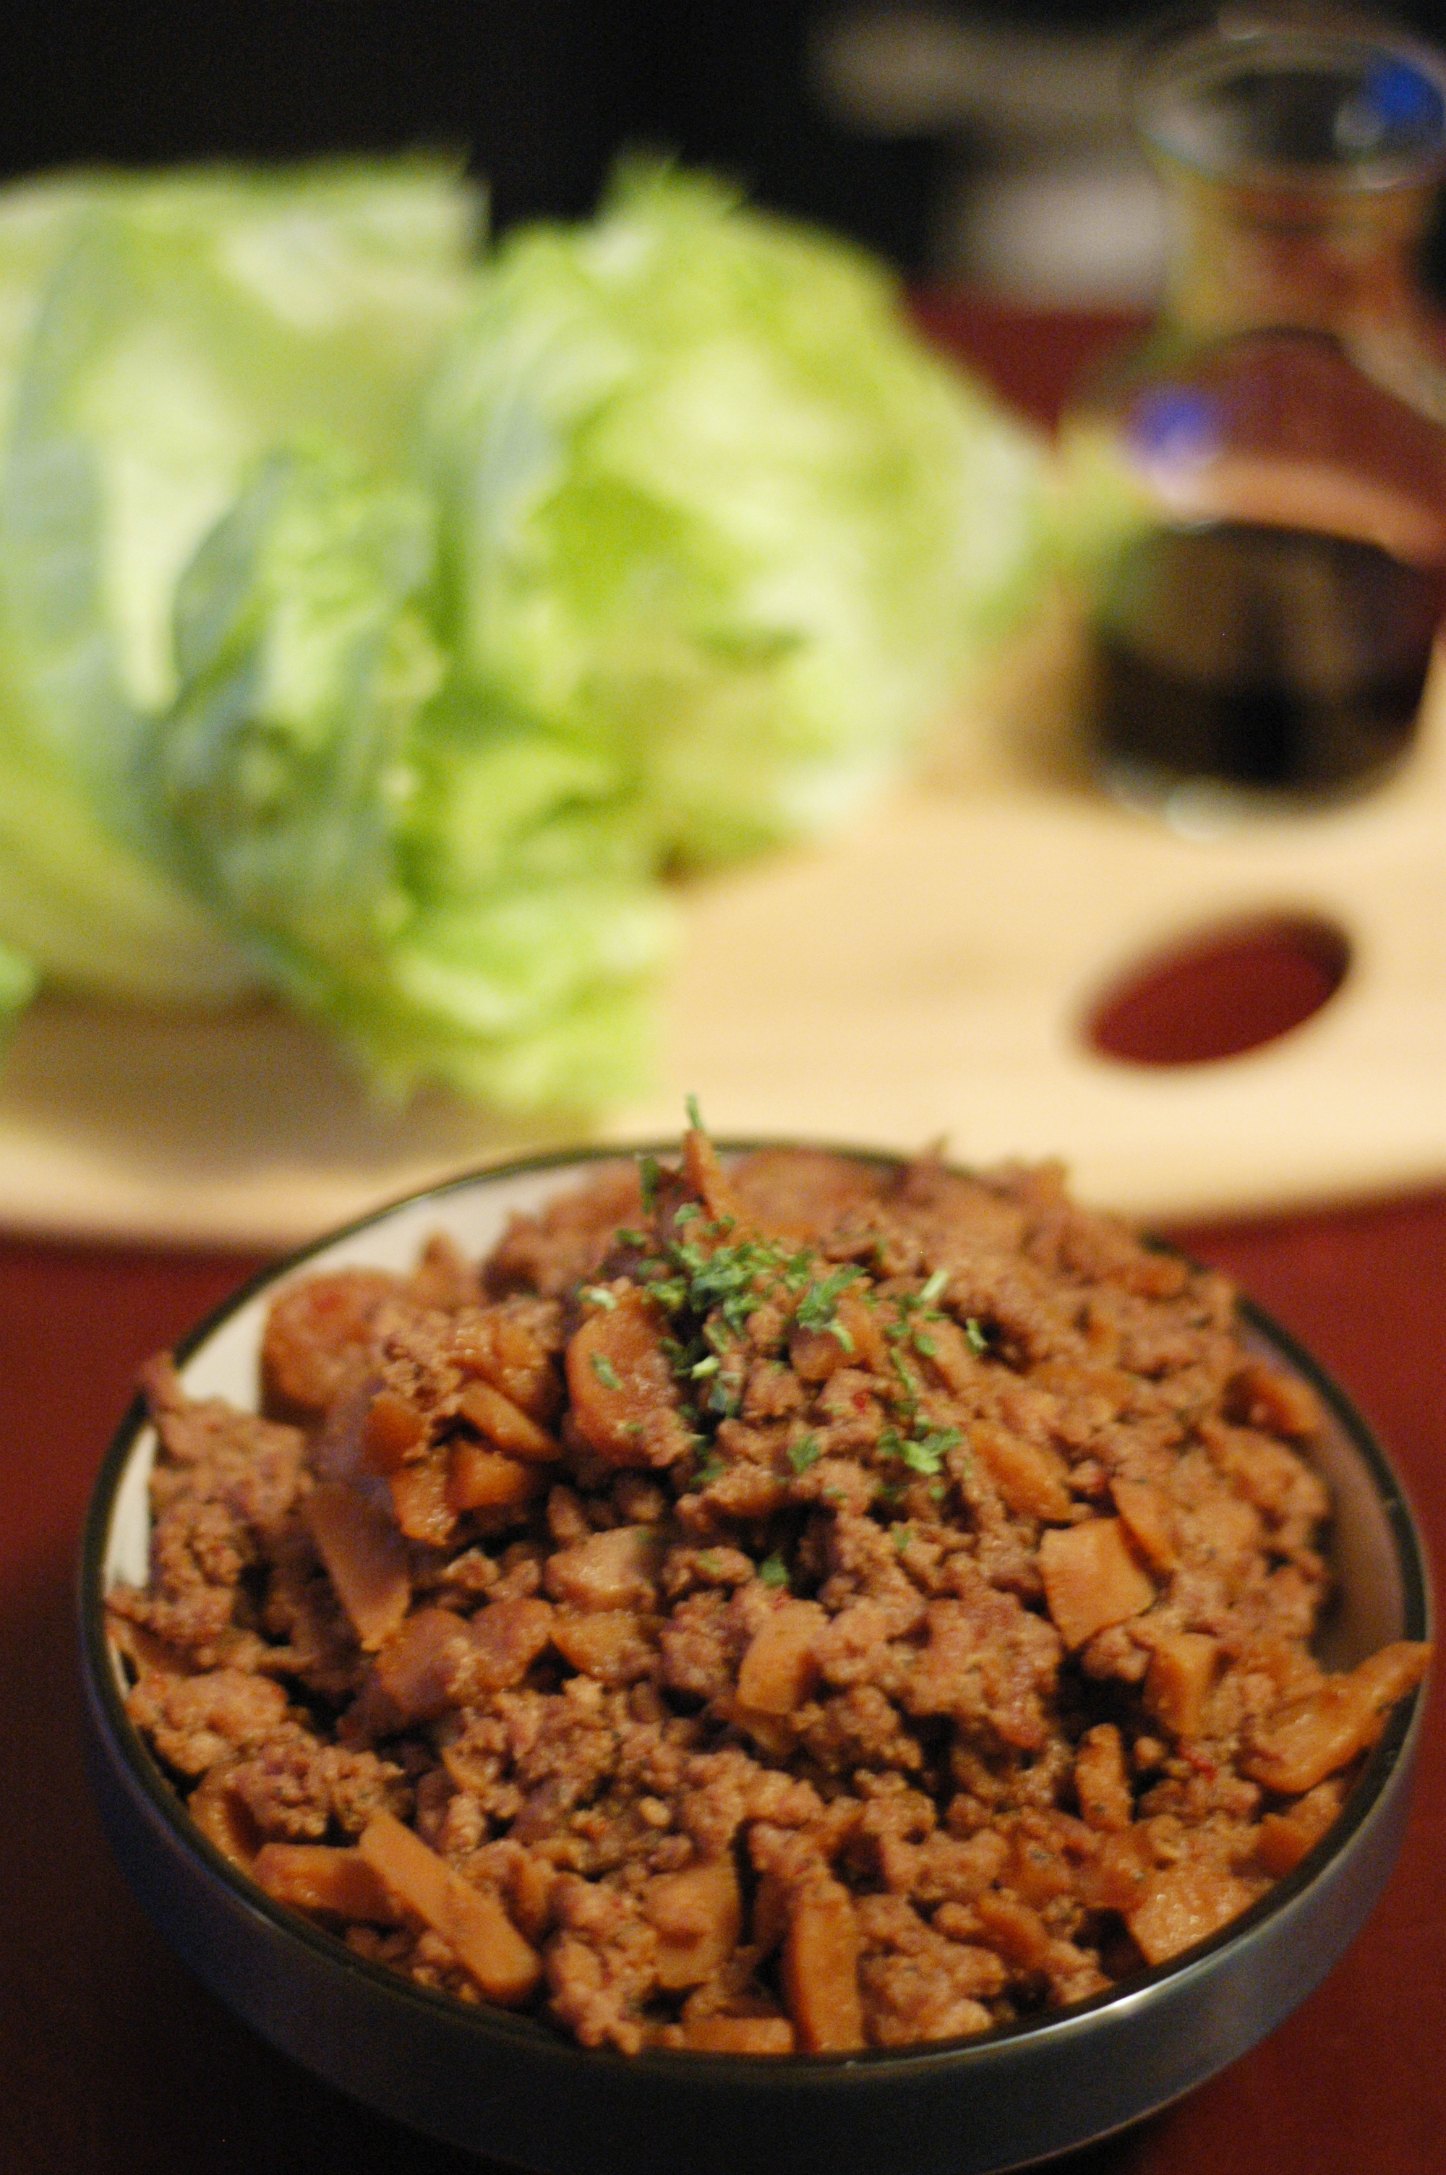 Black bowl with pork mixture with head of lettuce on cutting board in background